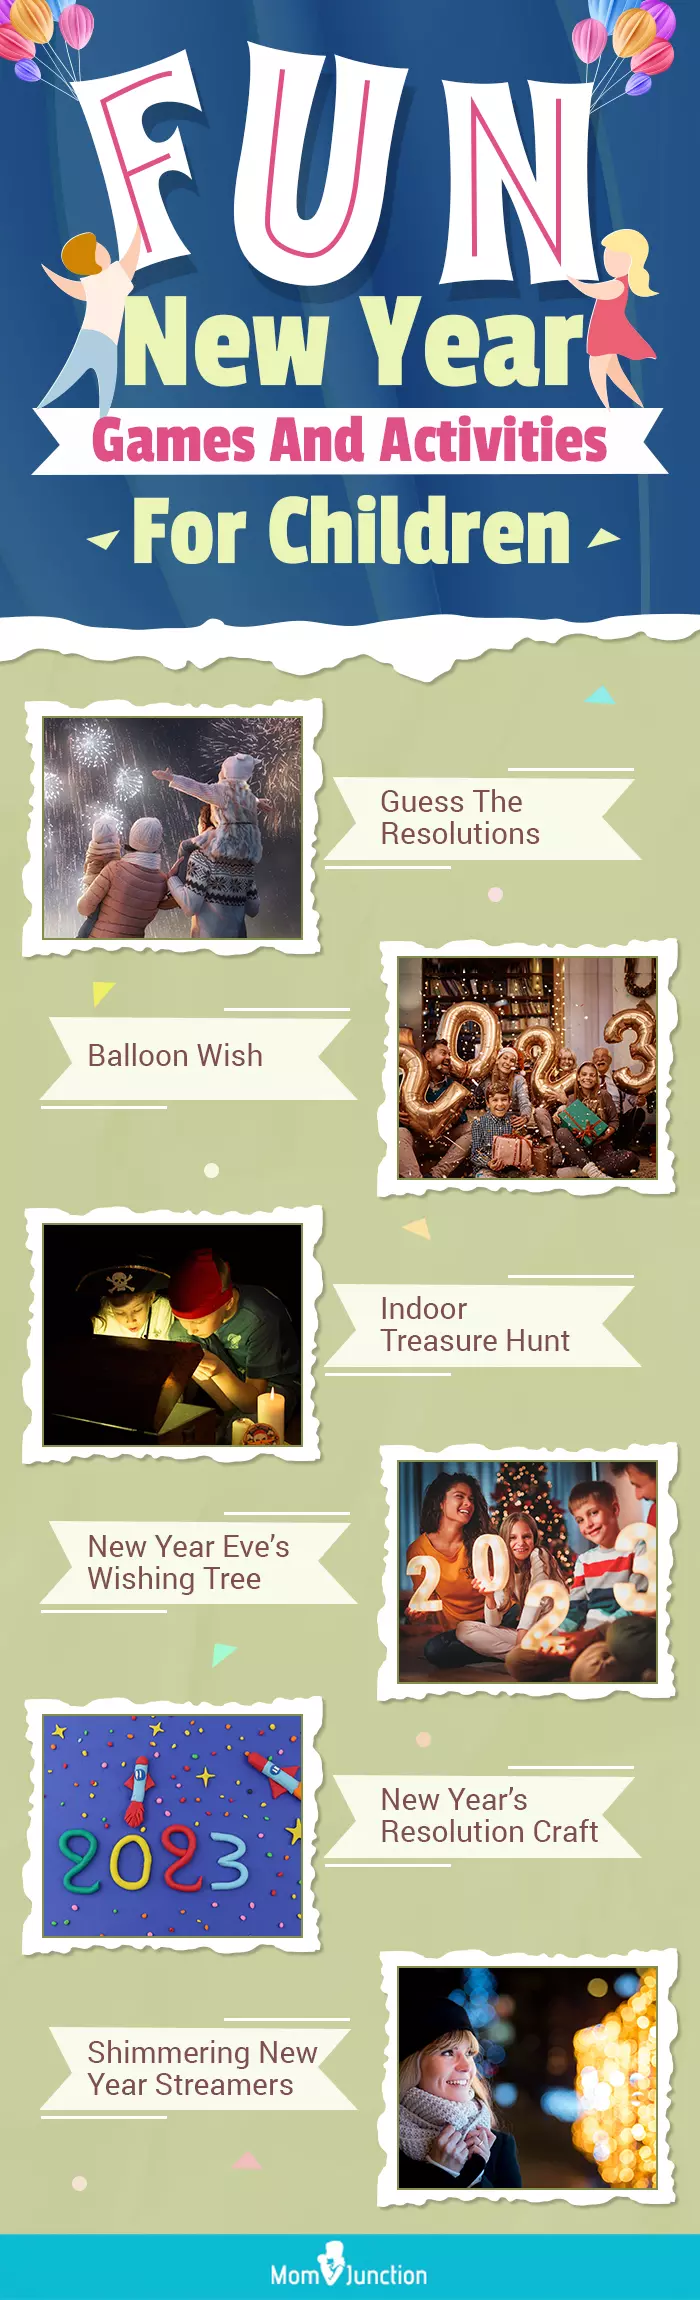 fun new year games and activities for children (infographic)